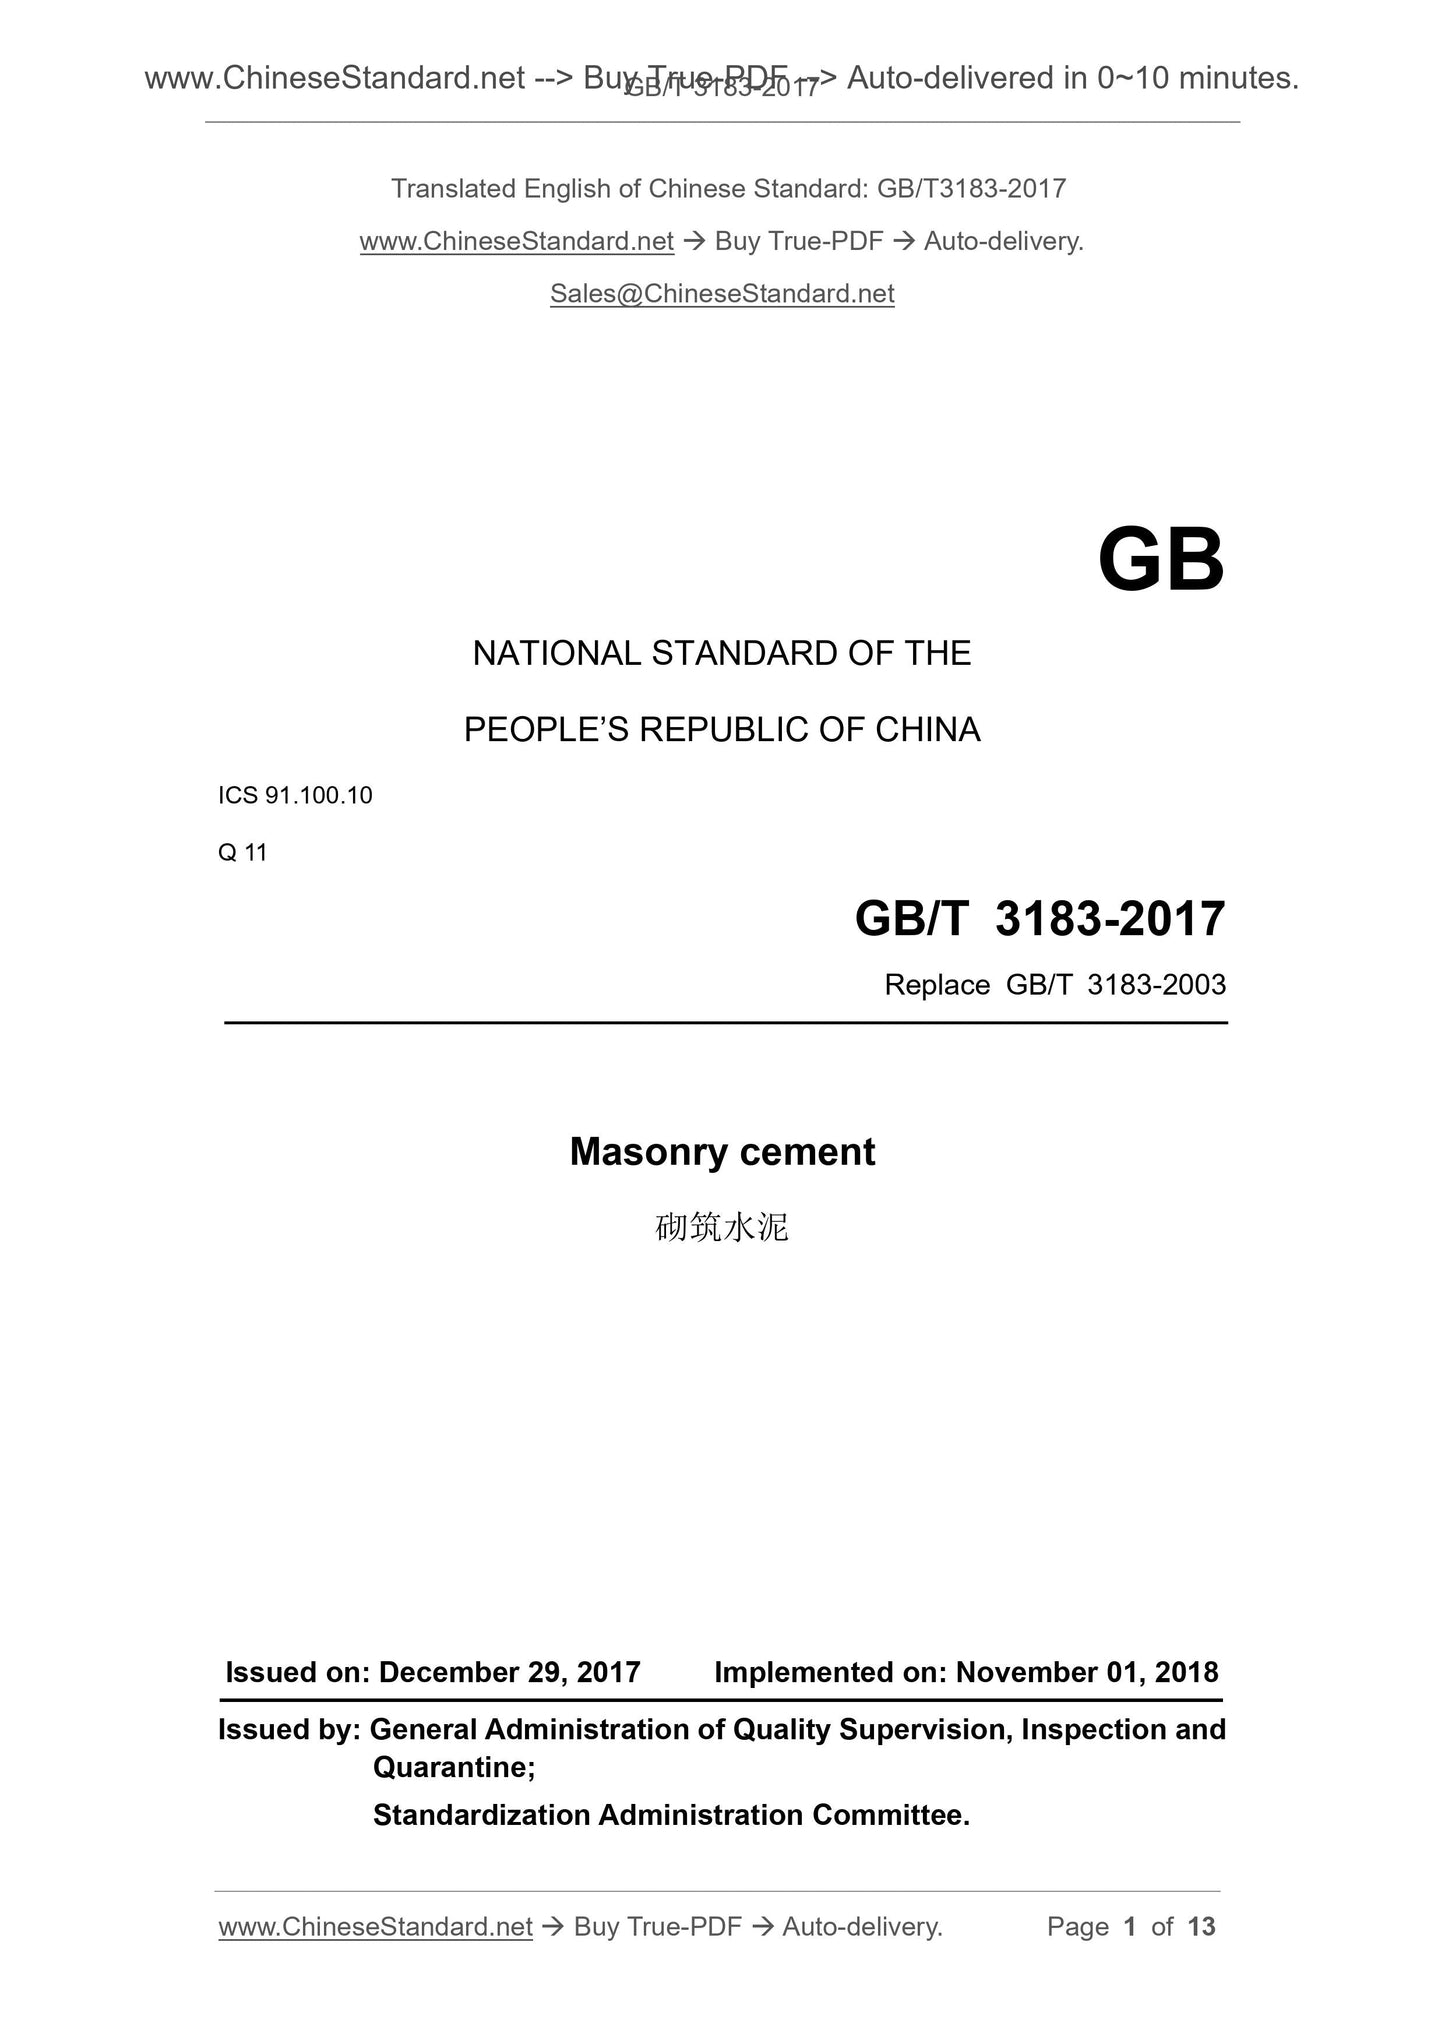 GB/T 3183-2017 Page 1